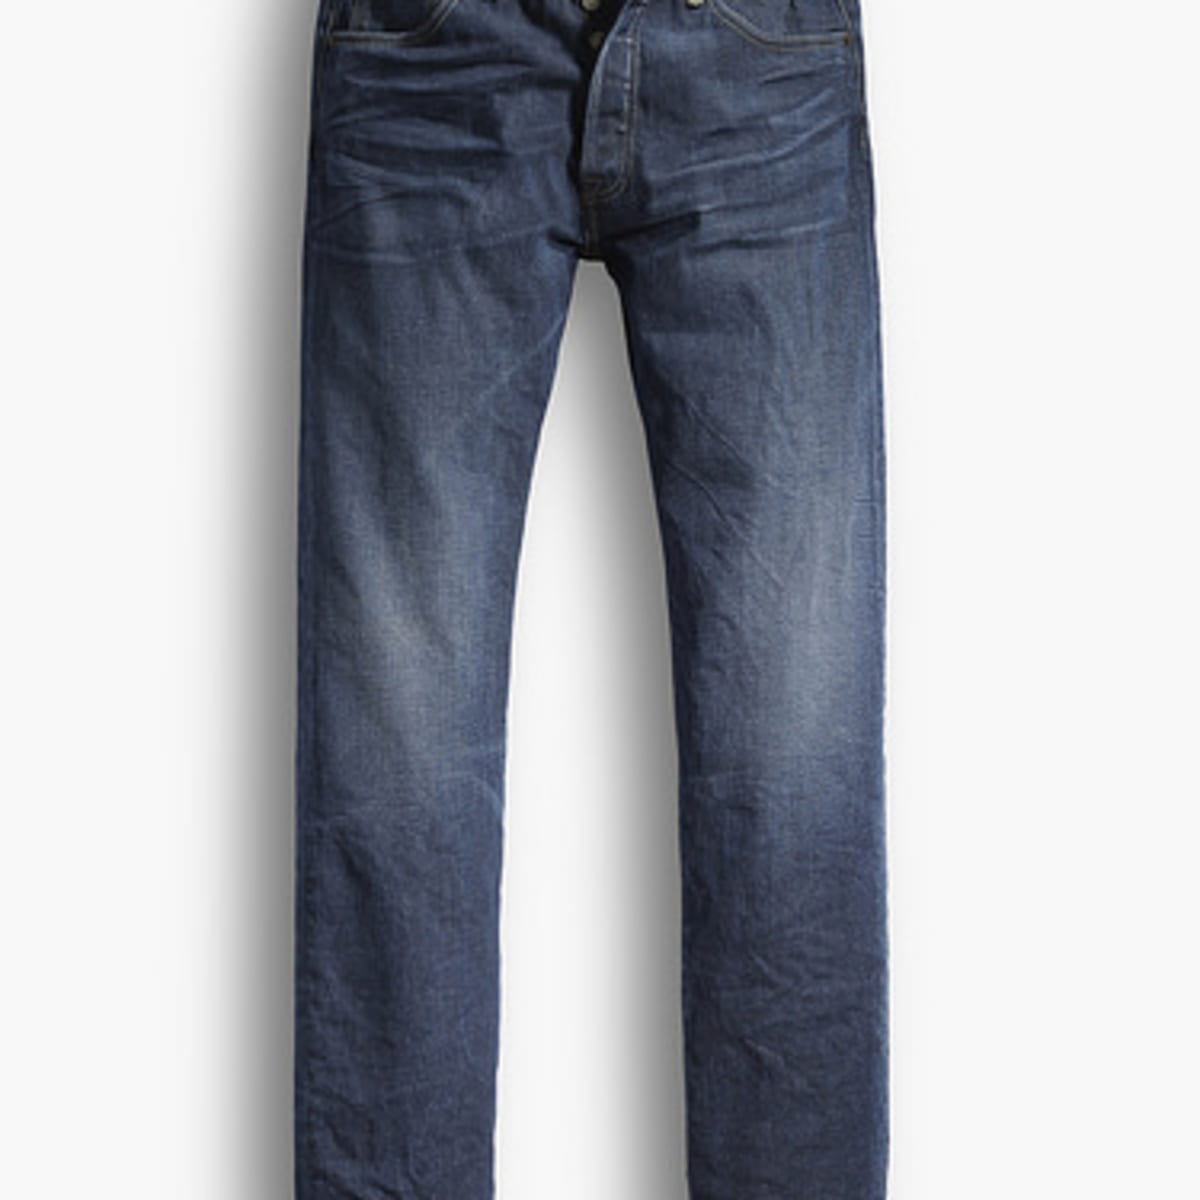 Levis Stretch Jeans: Our Thoughts on the Stretch Denim Trend - Men's Journal